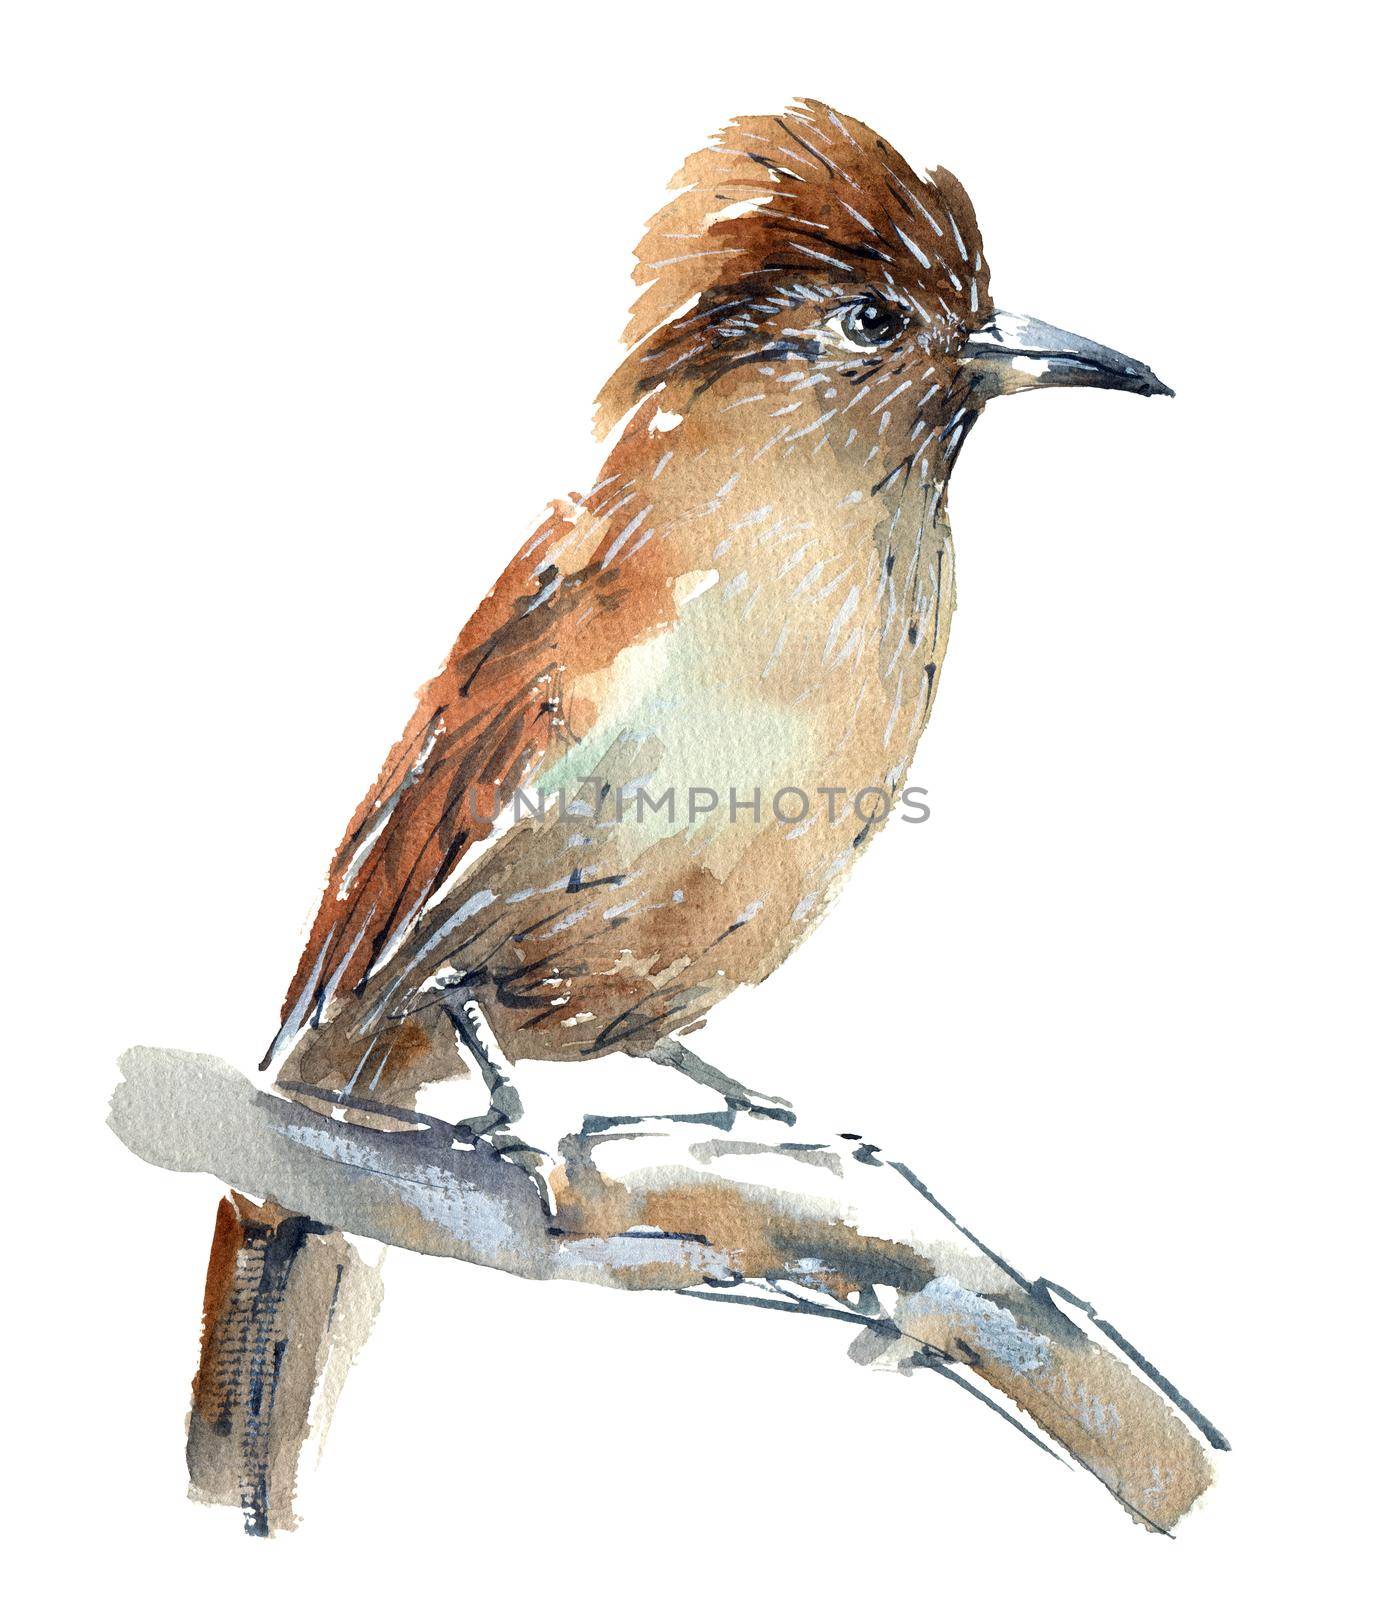 Watercolor illustration of exotic bird perched on a tree trunk. Isolated sketch of animal on white background.